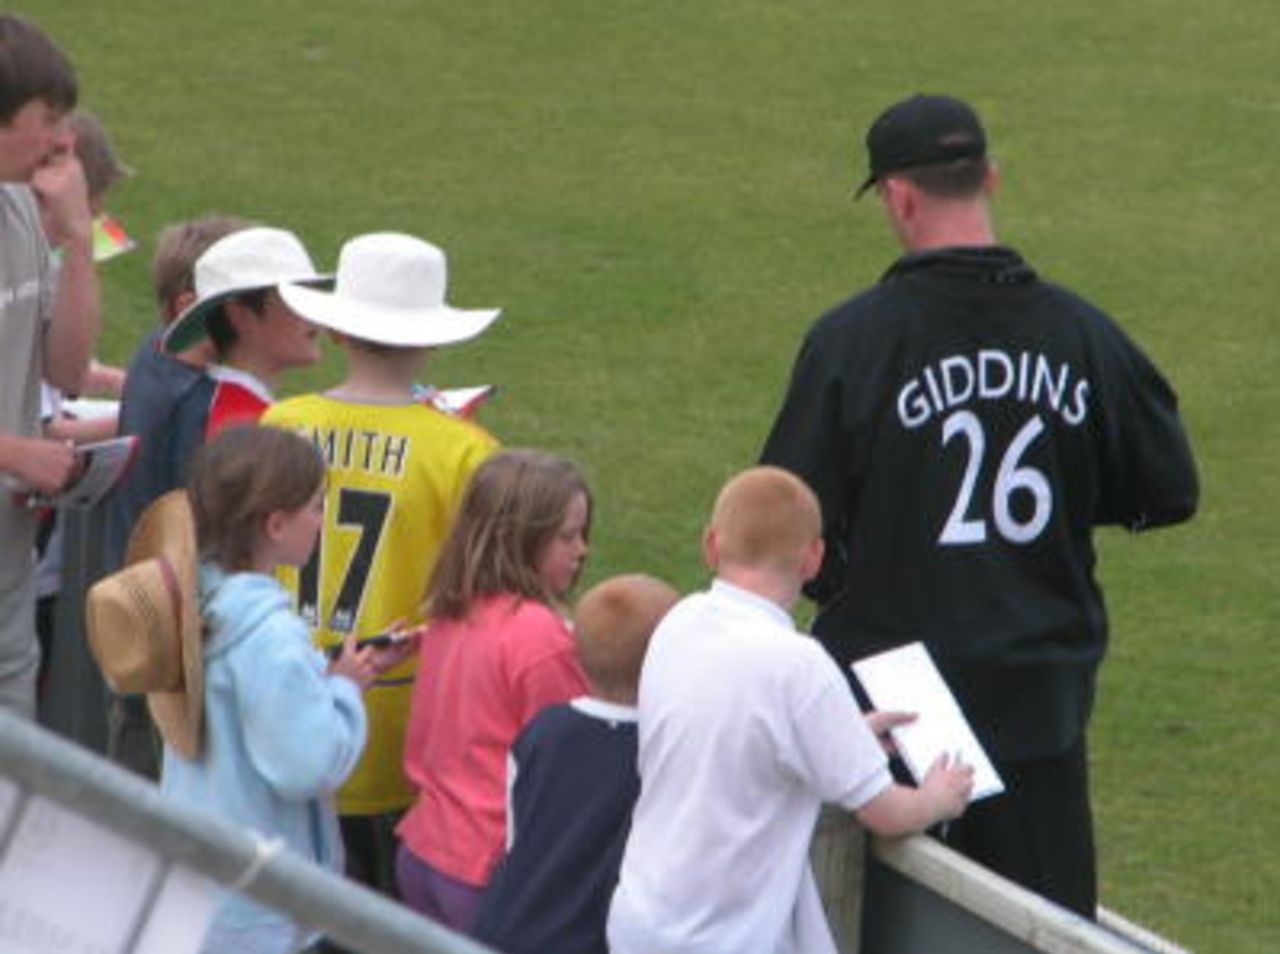 Ed Giddins oblidges the young autograph hunters